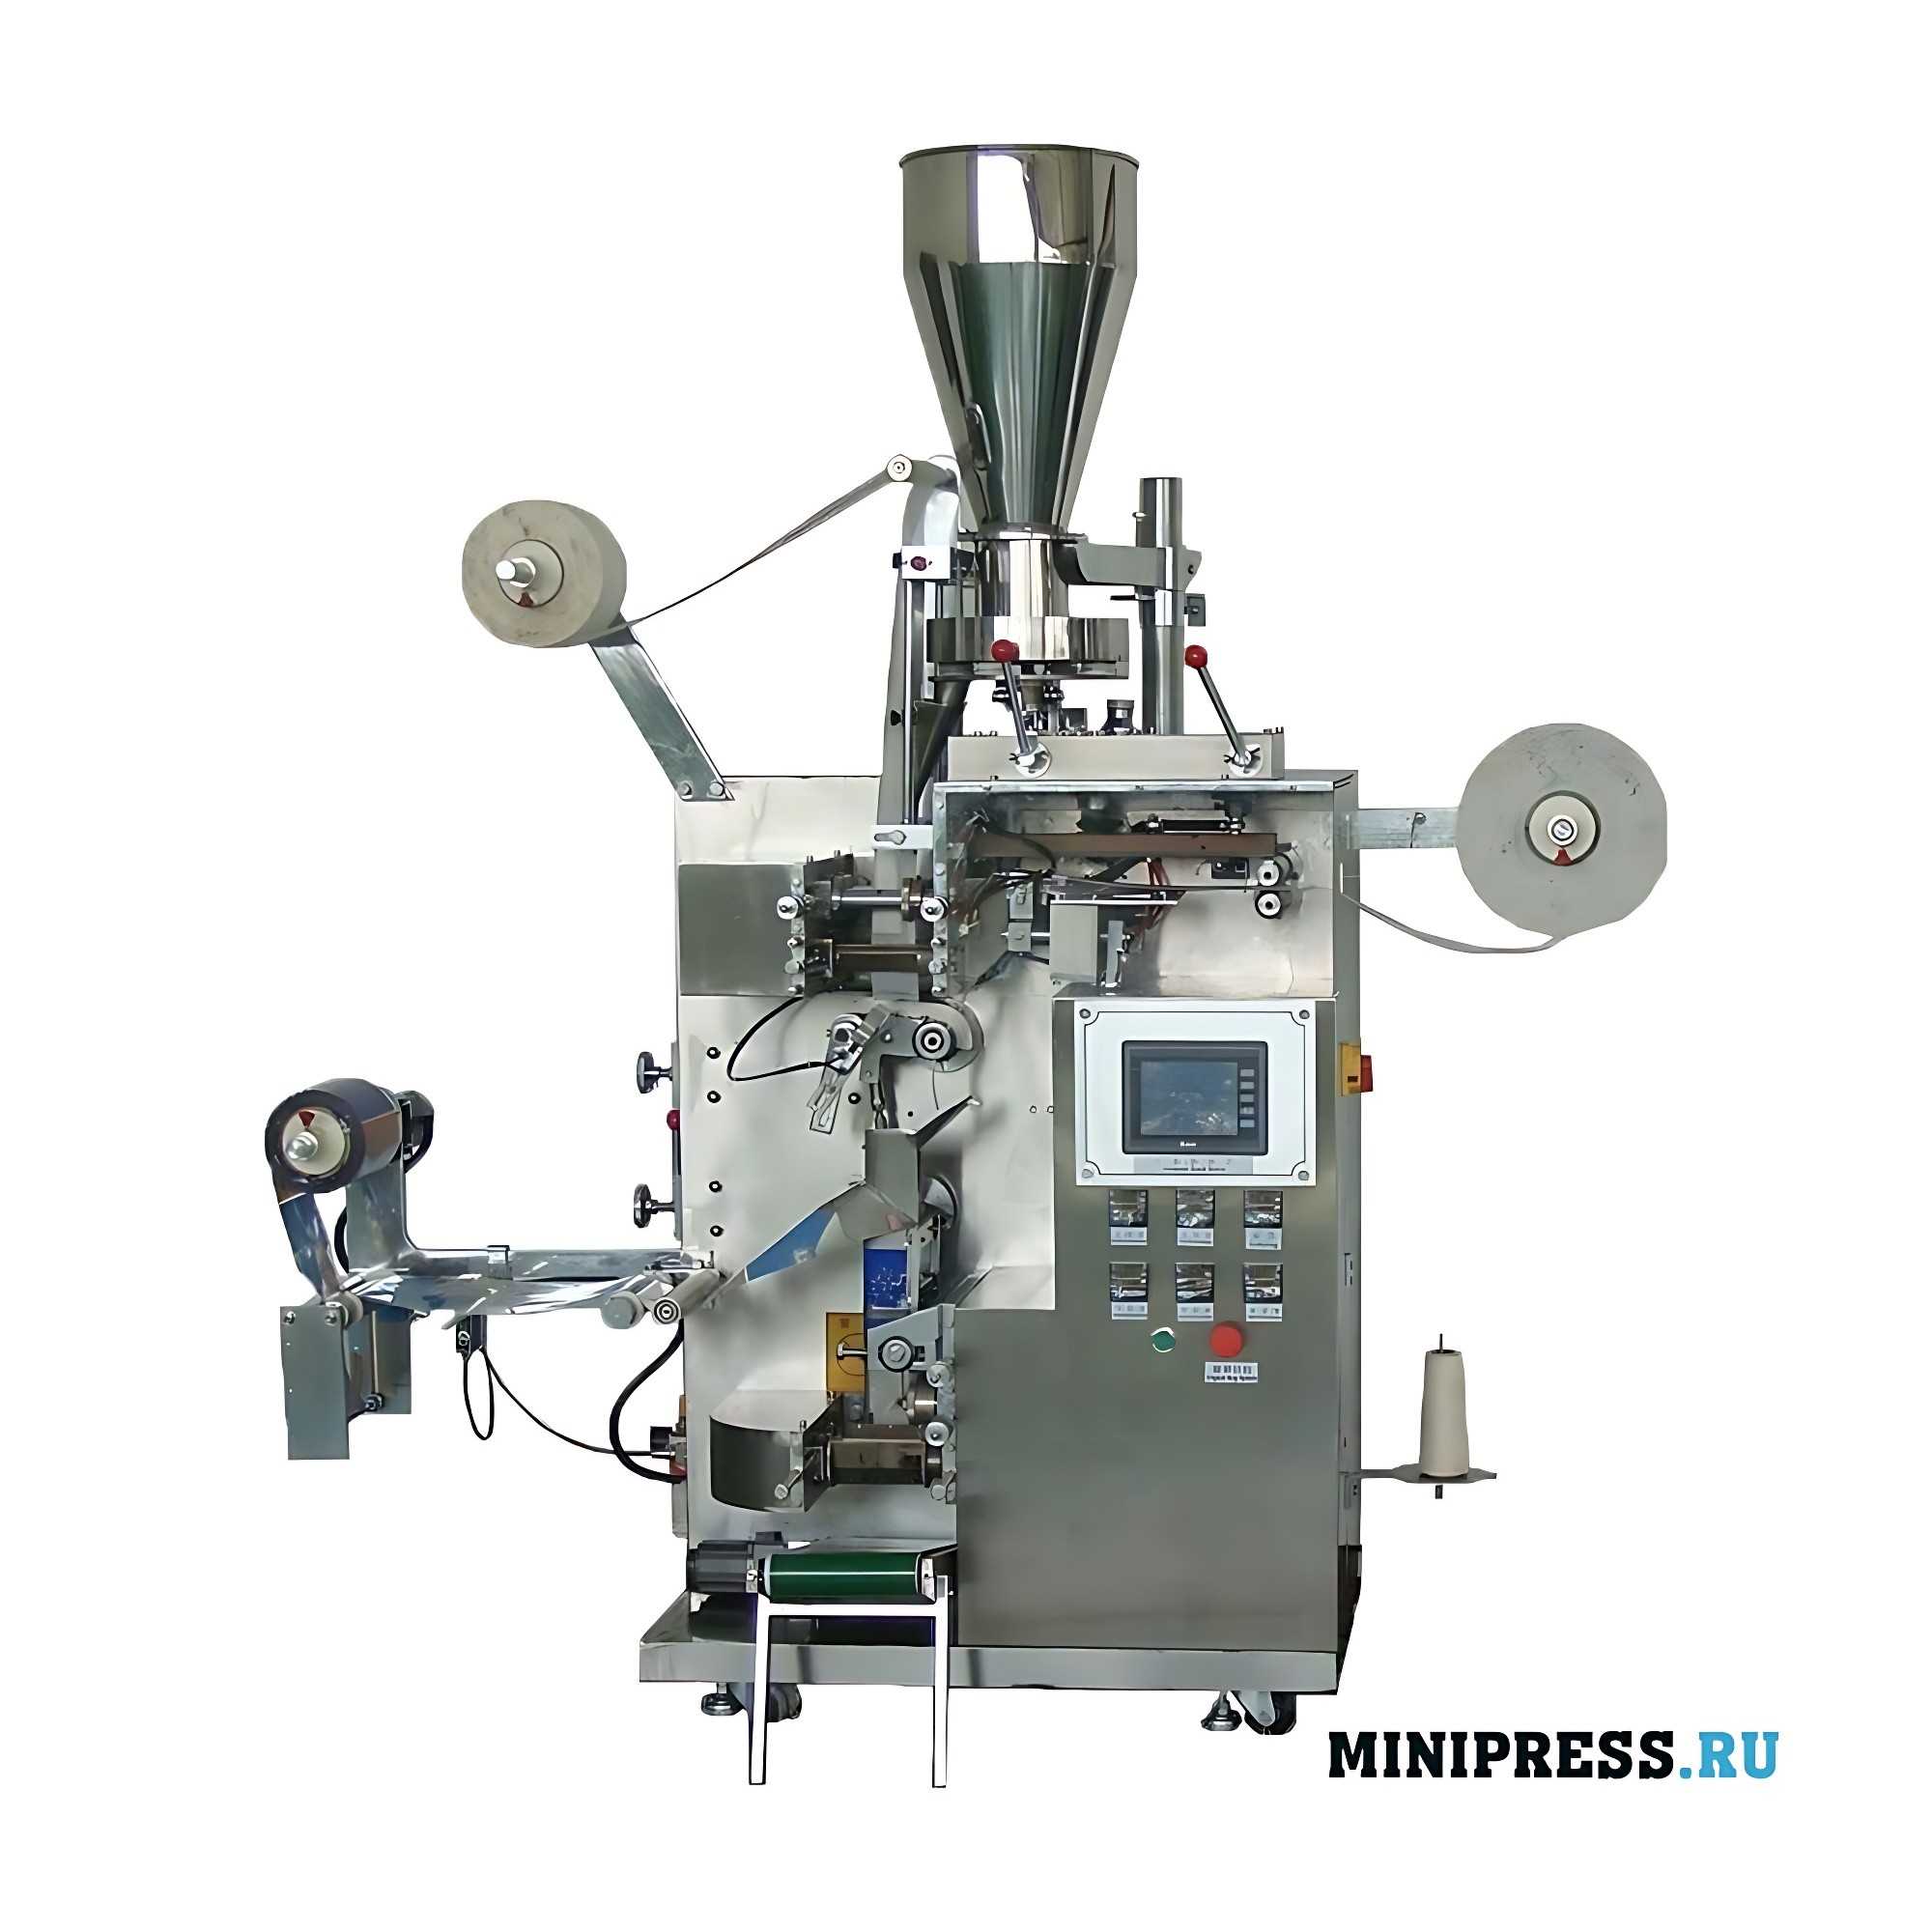 Automatic equipment for tea packing and packaging in an external bag of HPM 4